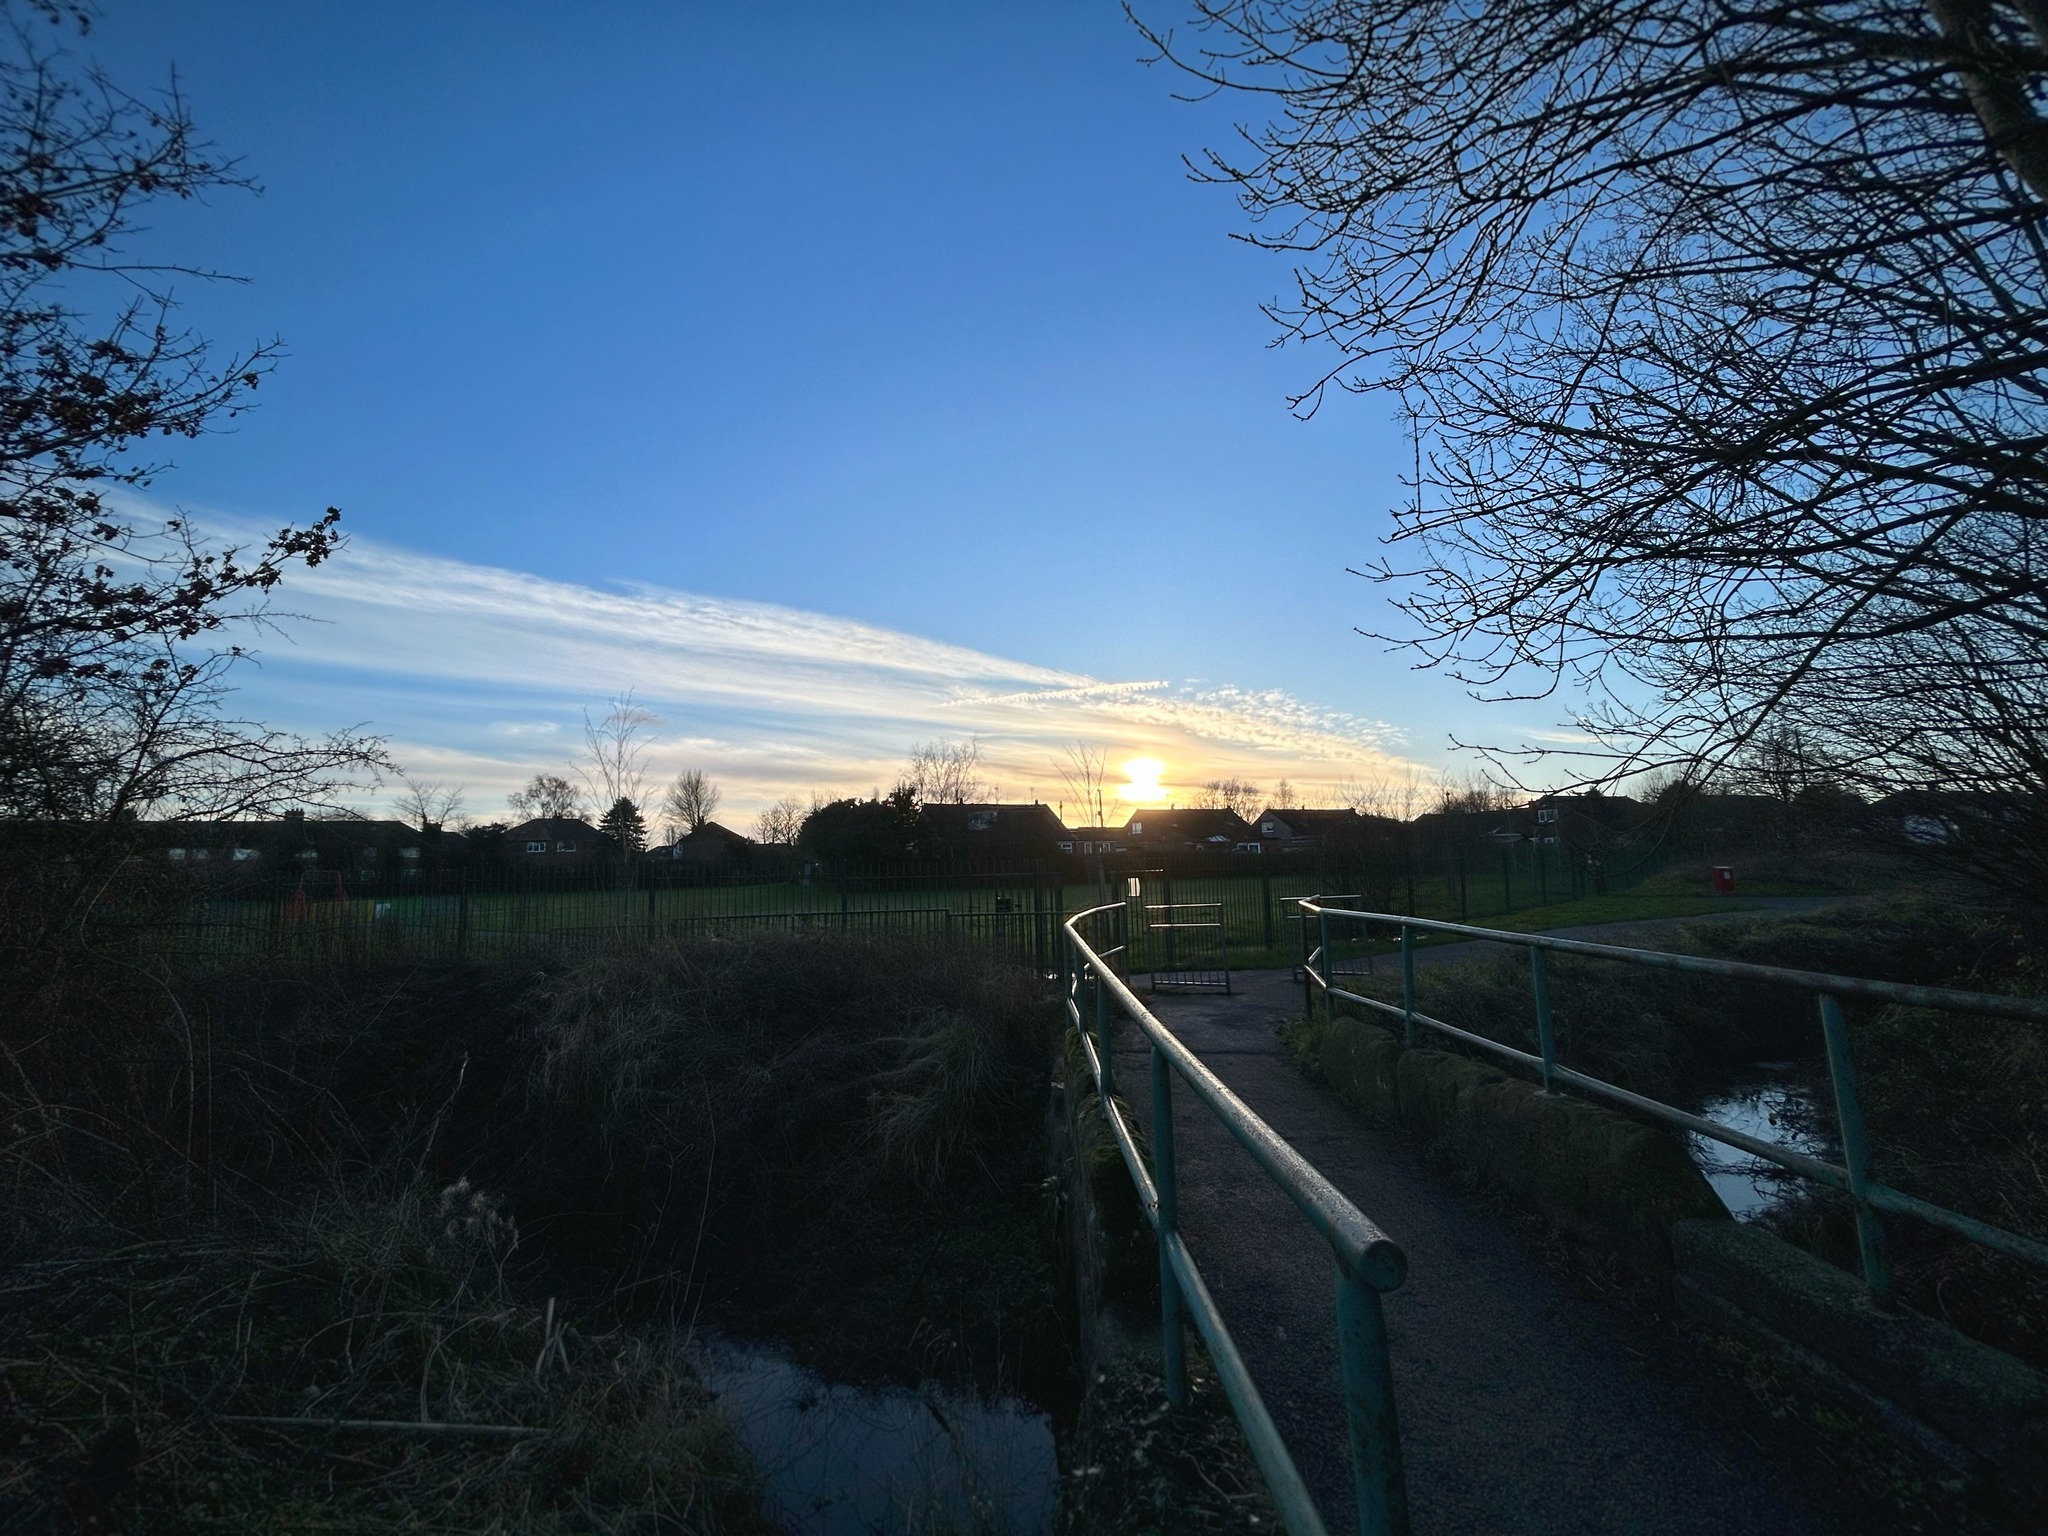 Sunset over the stream near Two Butt Lane by Kevin Moulsdale